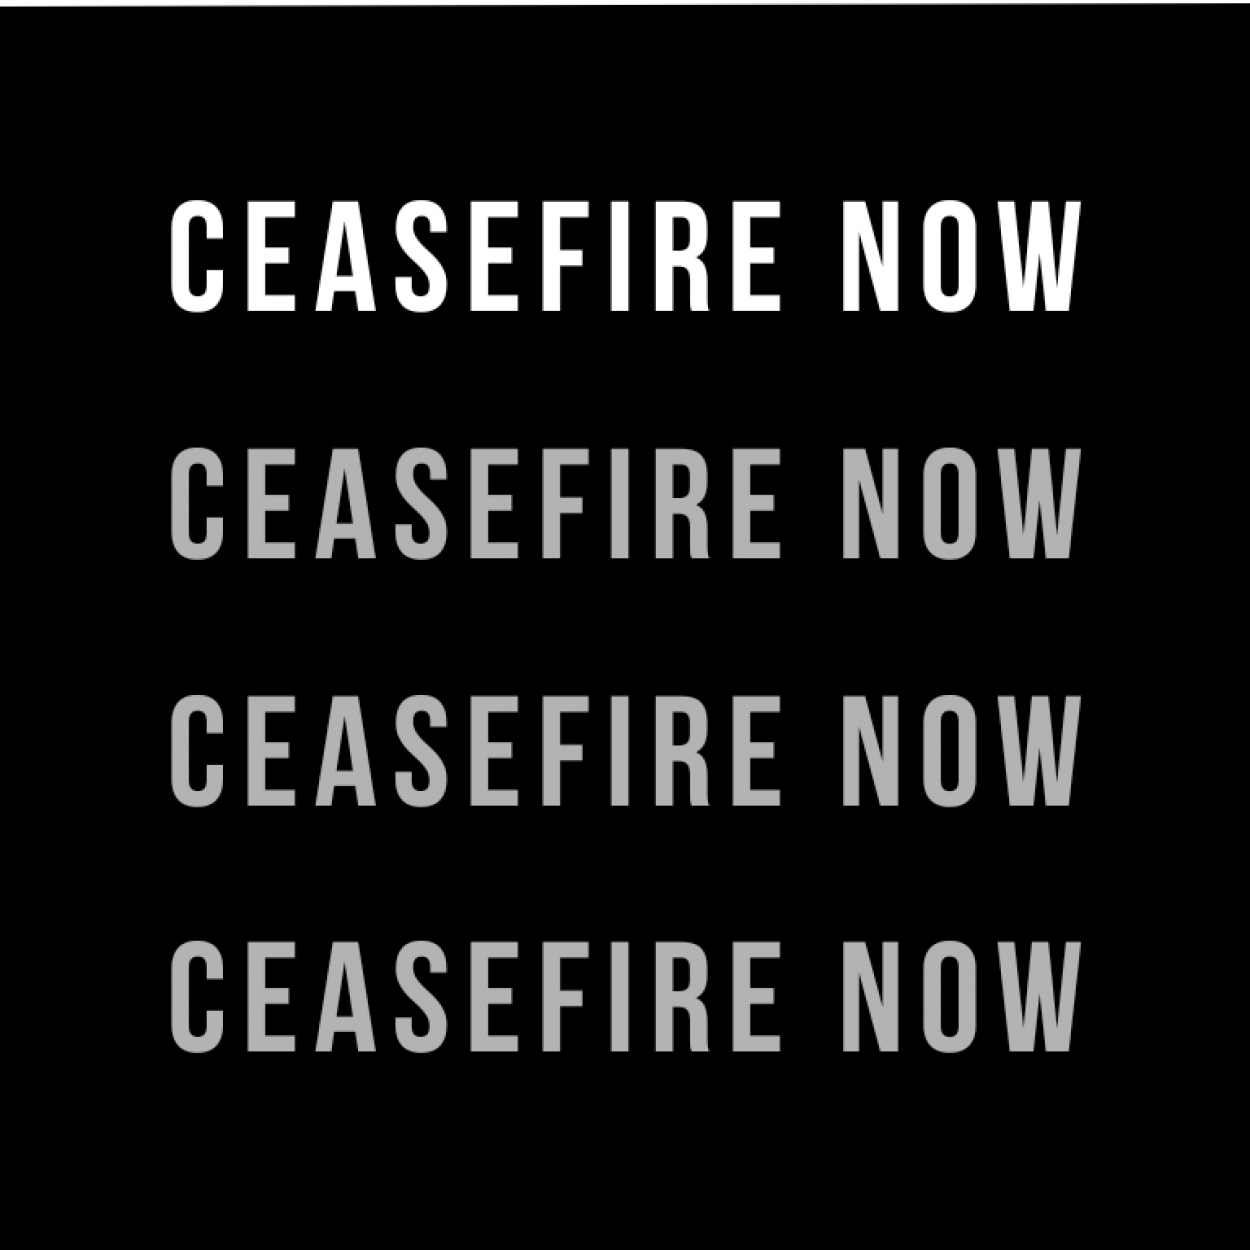 The words 'Ceasefire Now' are repeated four times